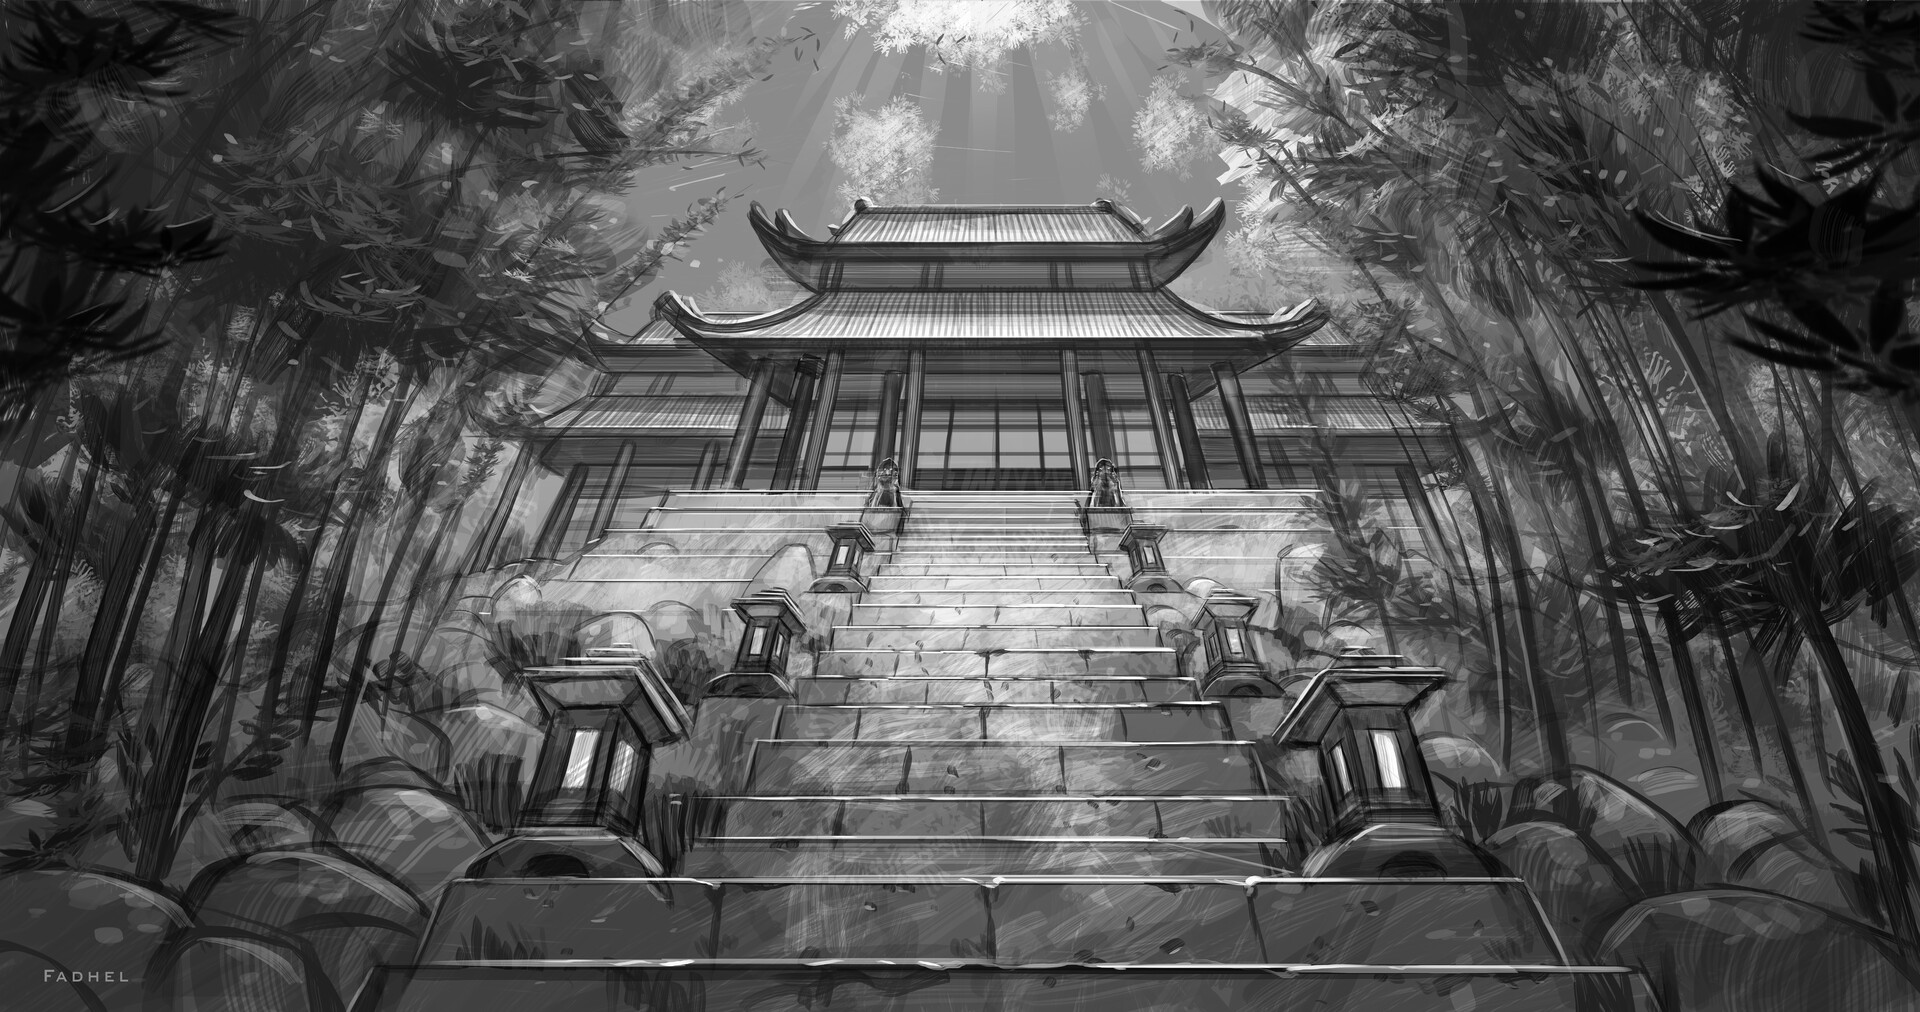 ArtStation - Chinese temple sketch